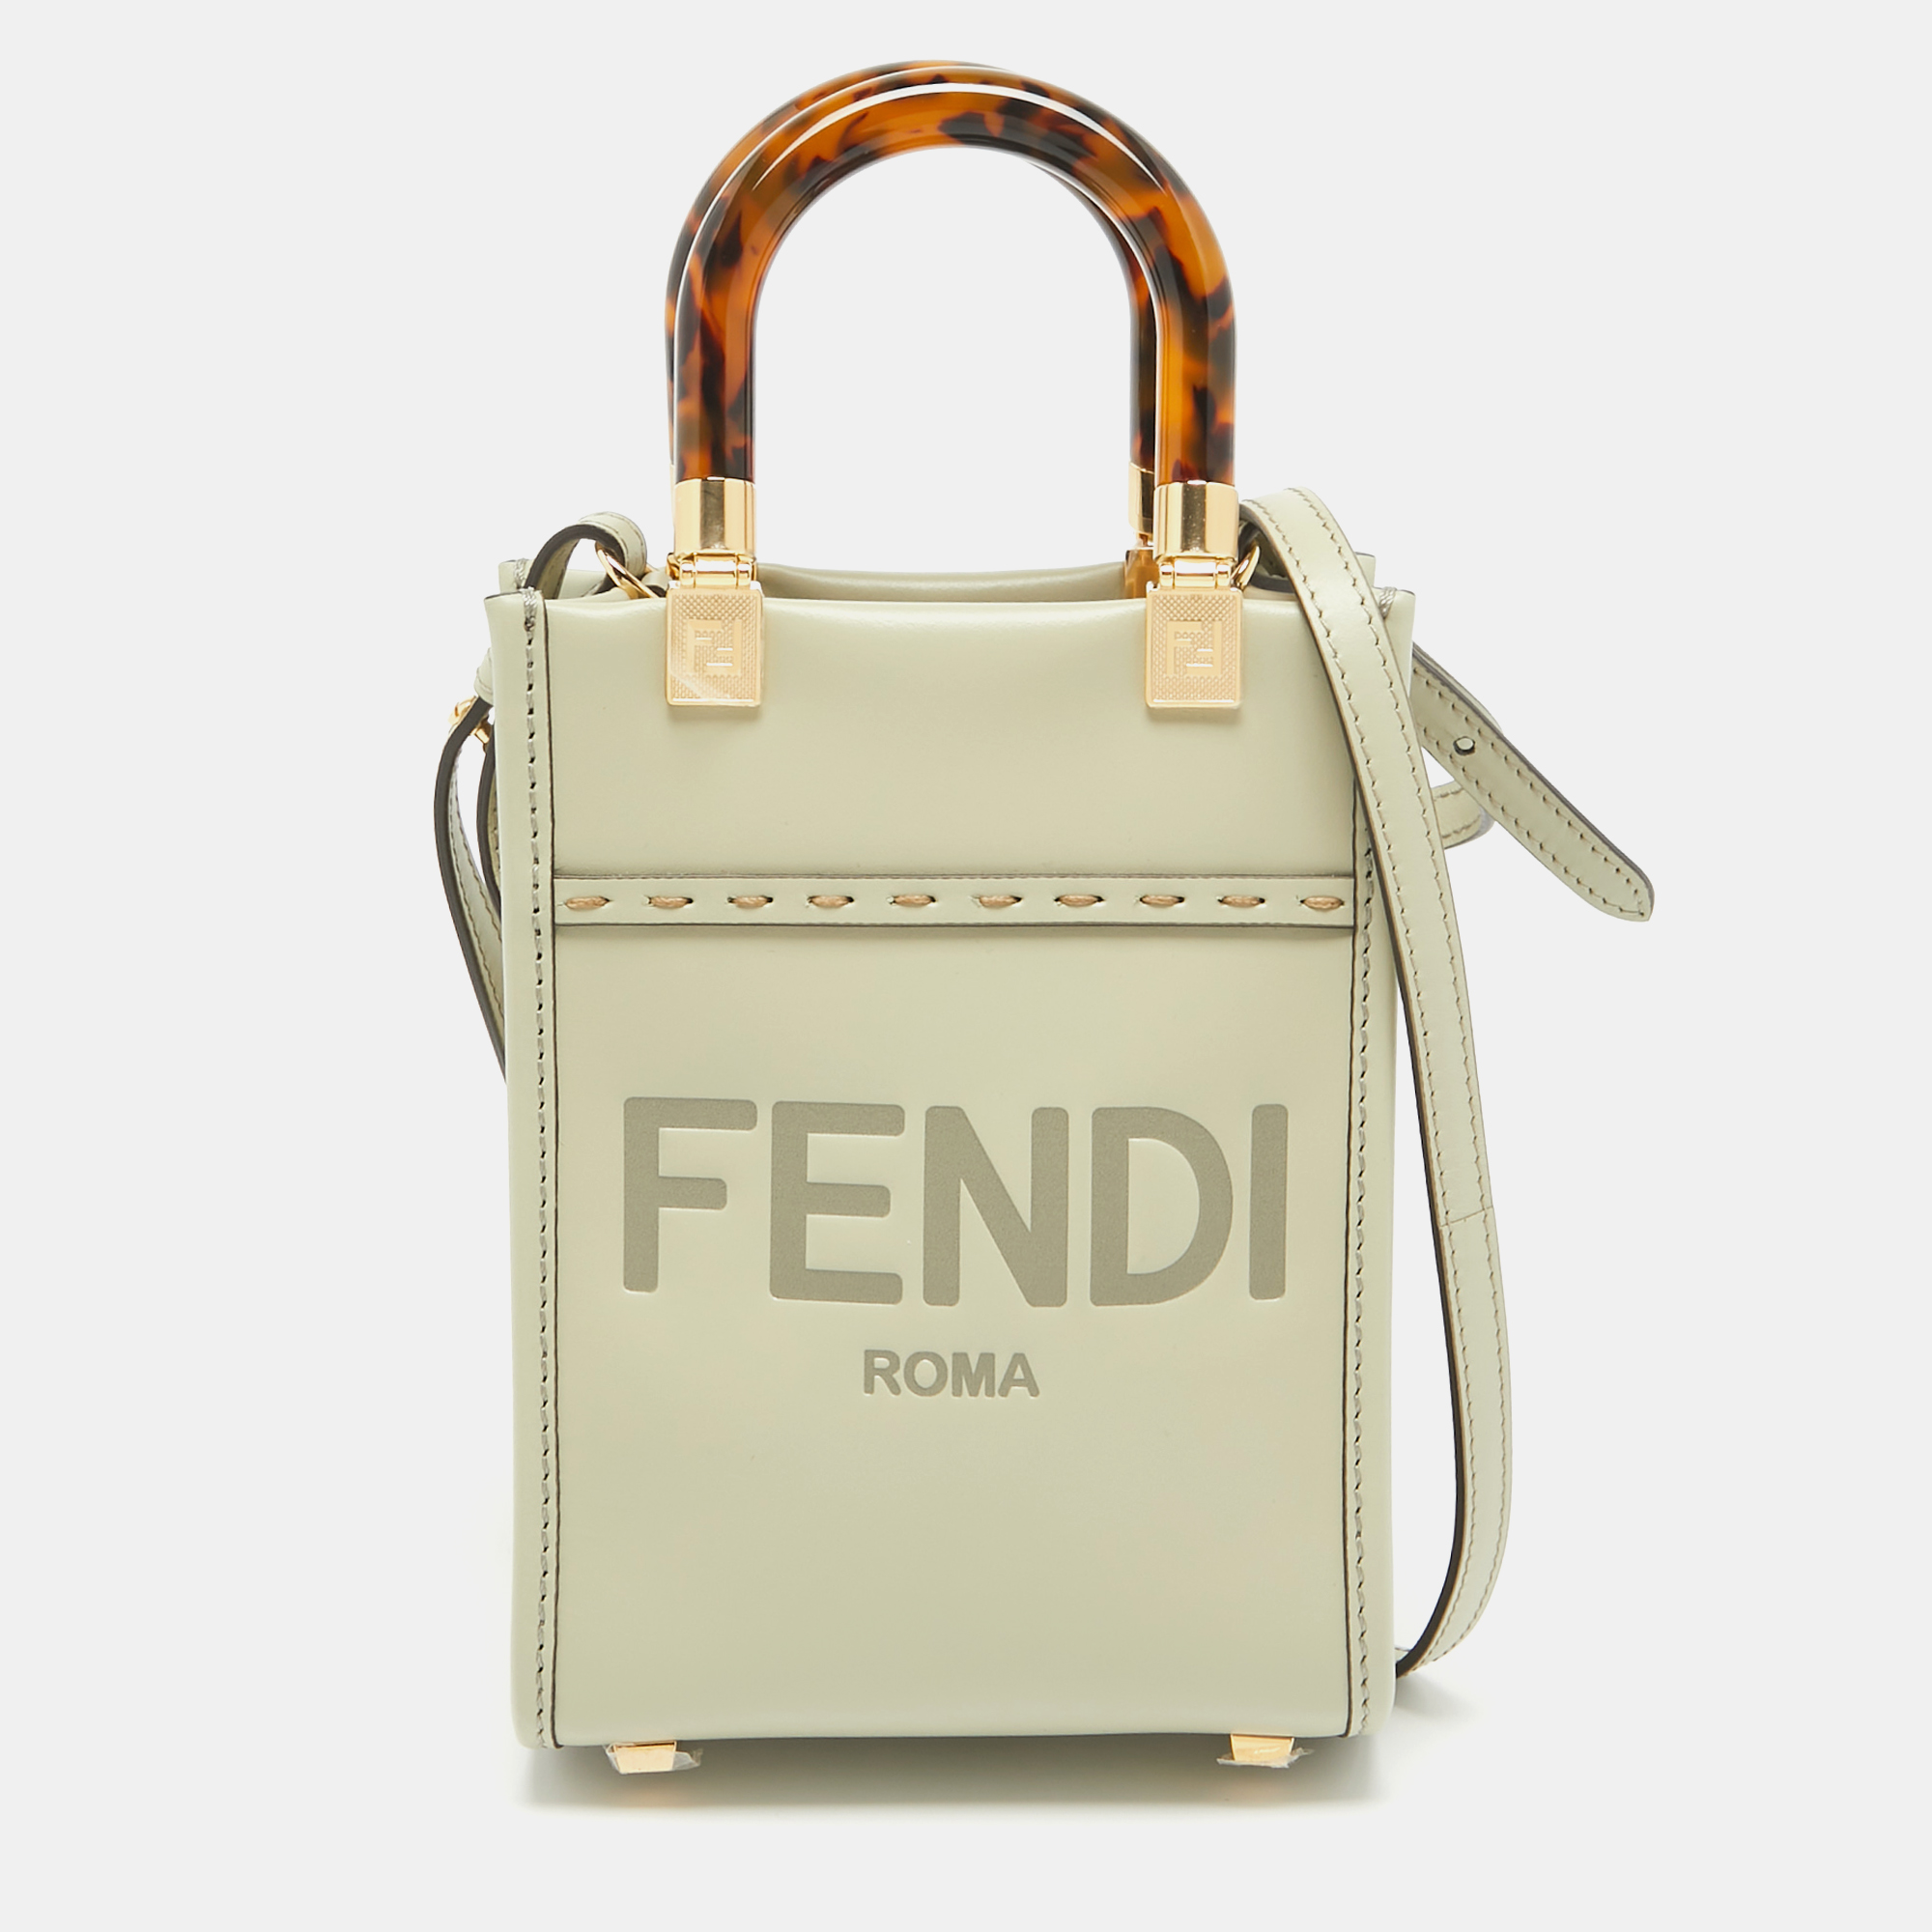 Crafted from luxurious green leather the Fendi Sunshine tote exudes effortless glamour. Its compact size makes it perfect for everyday essentials while the sleek design and subtle Fendi logo add a touch of understated elegance. Carry it with confidence and style for a chic finishing touch to any ensemble.